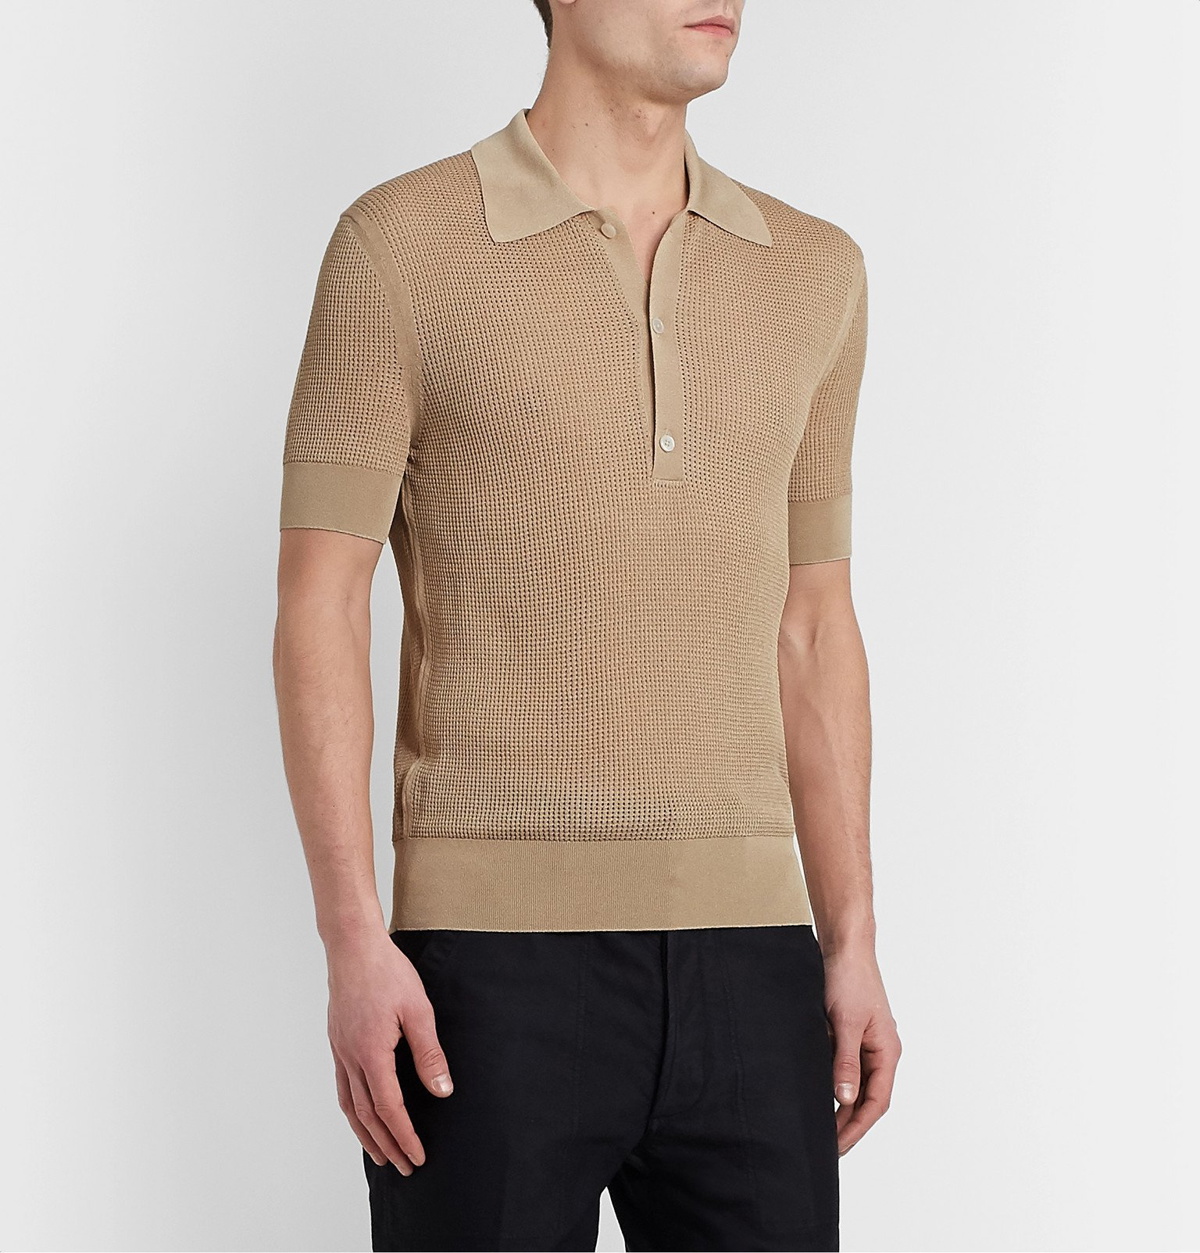 TOM FORD - Open-Knit Polo Shirt - Neutrals TOM FORD